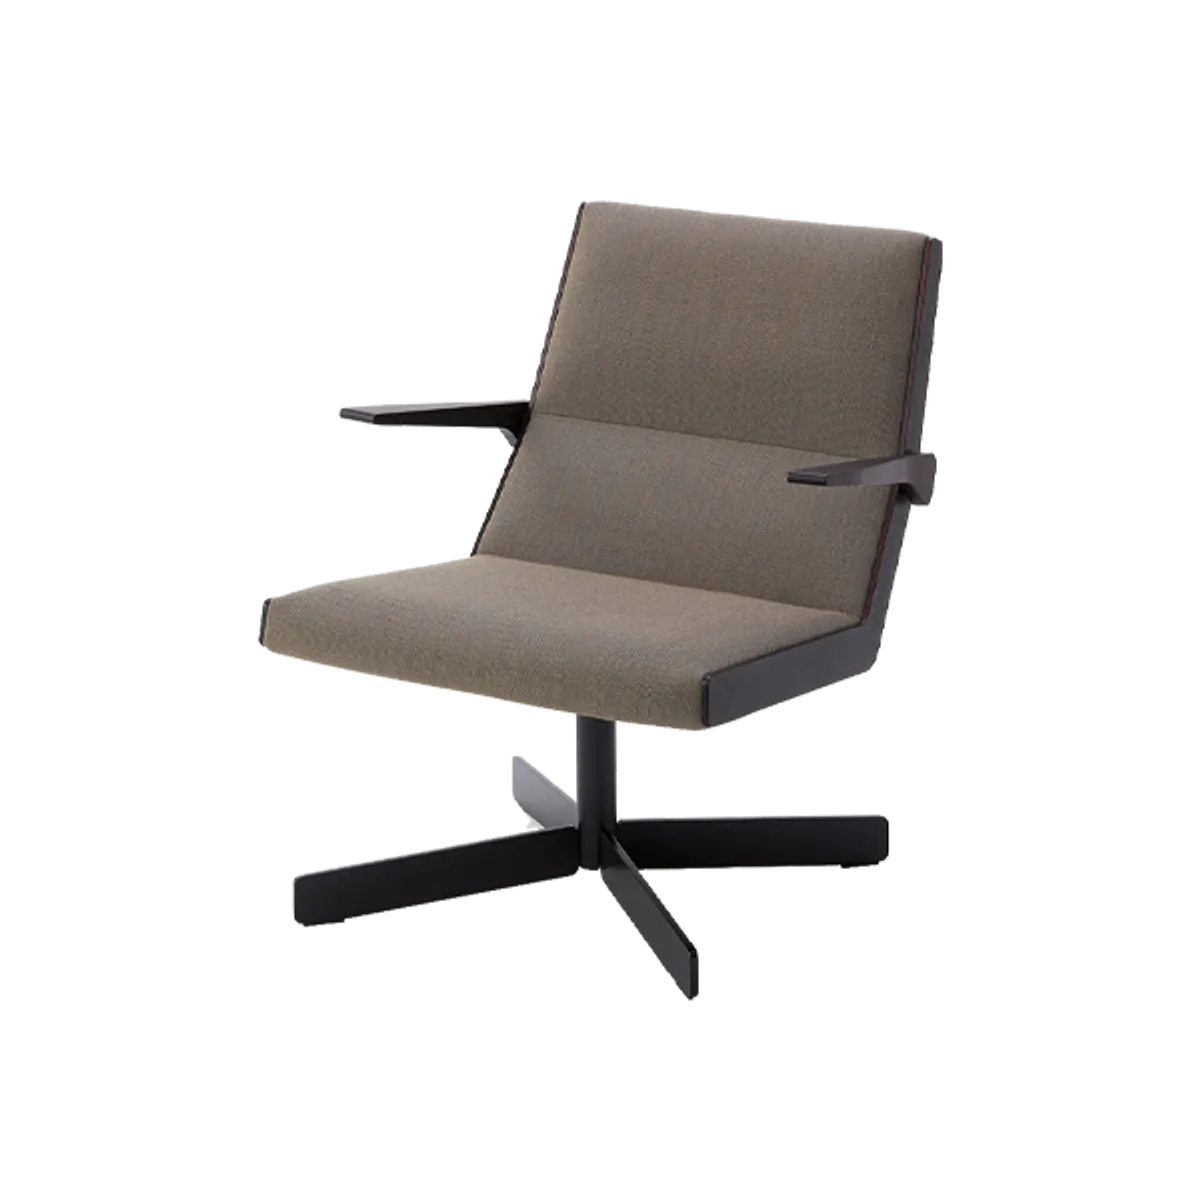 Stilo swivel lounge chair warms Inside Out Contracts